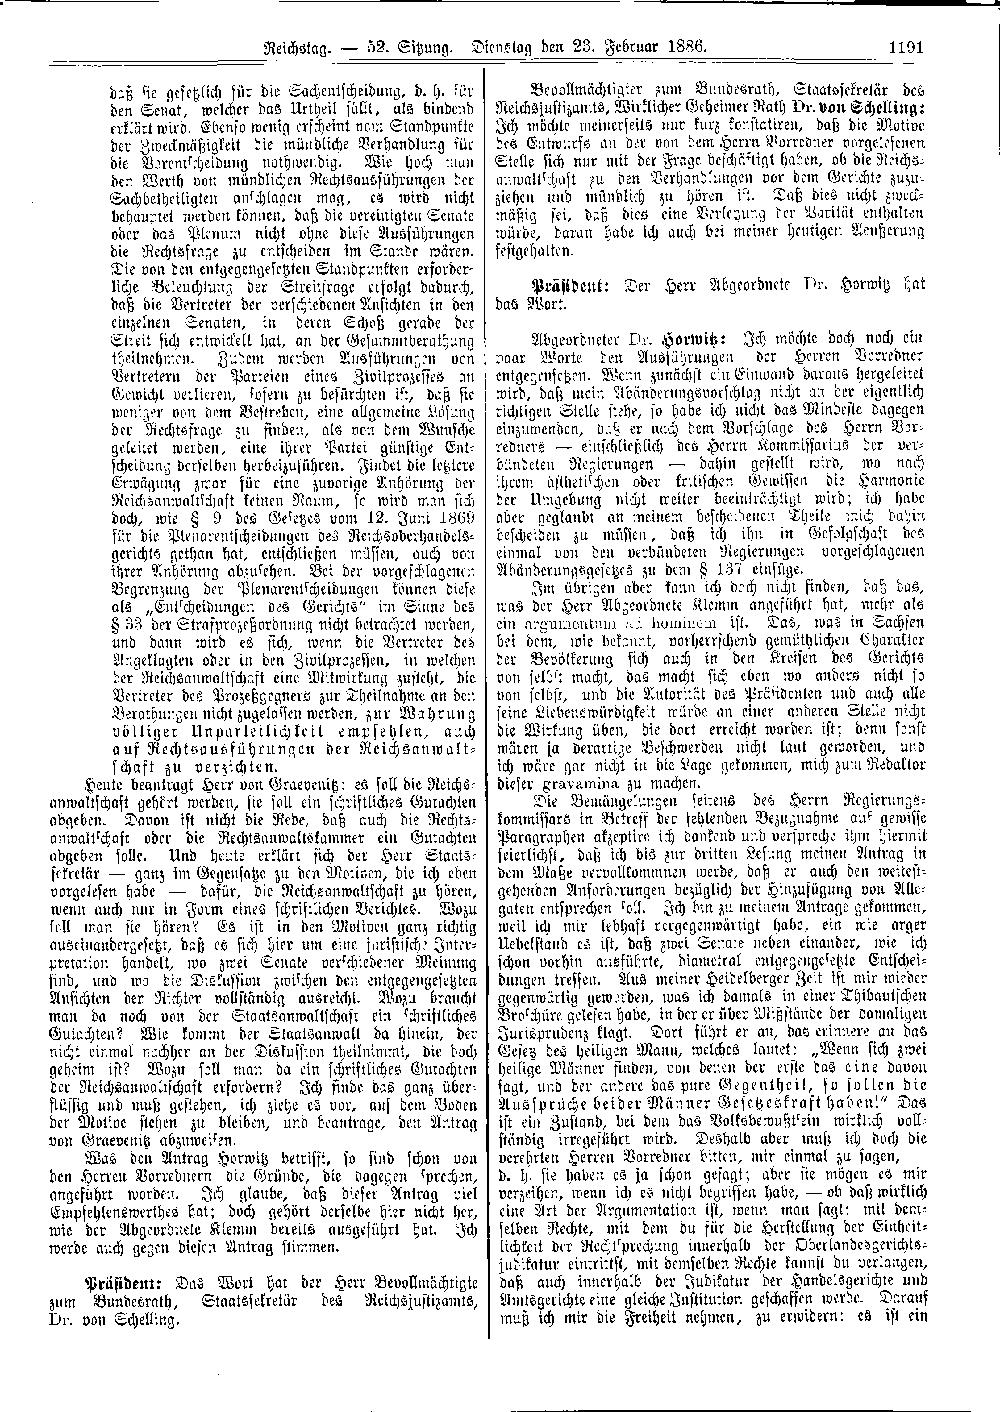 Scan of page 1191